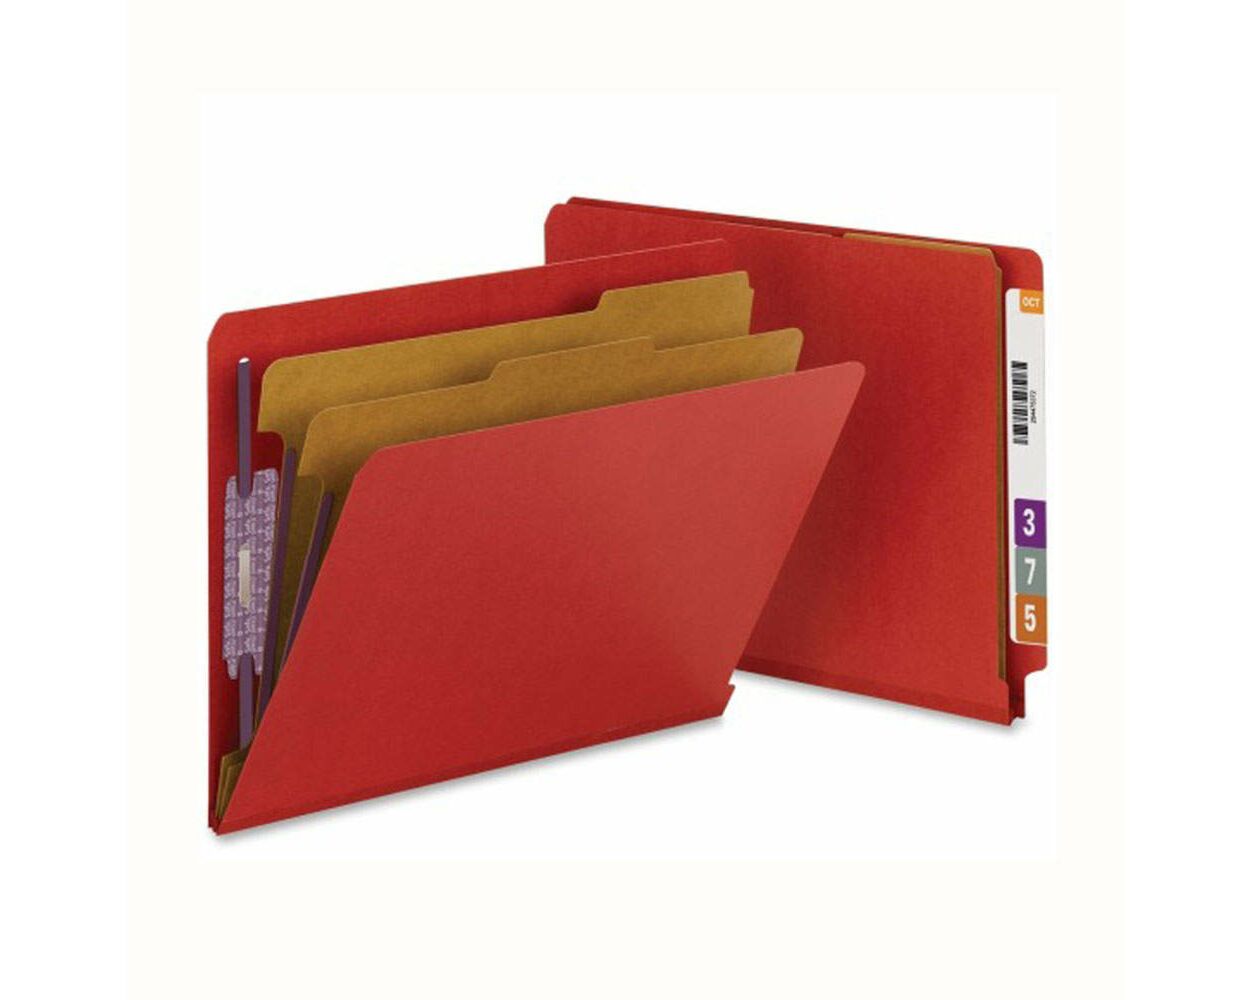 File Assortment Folders Products, Supplies and Equipment